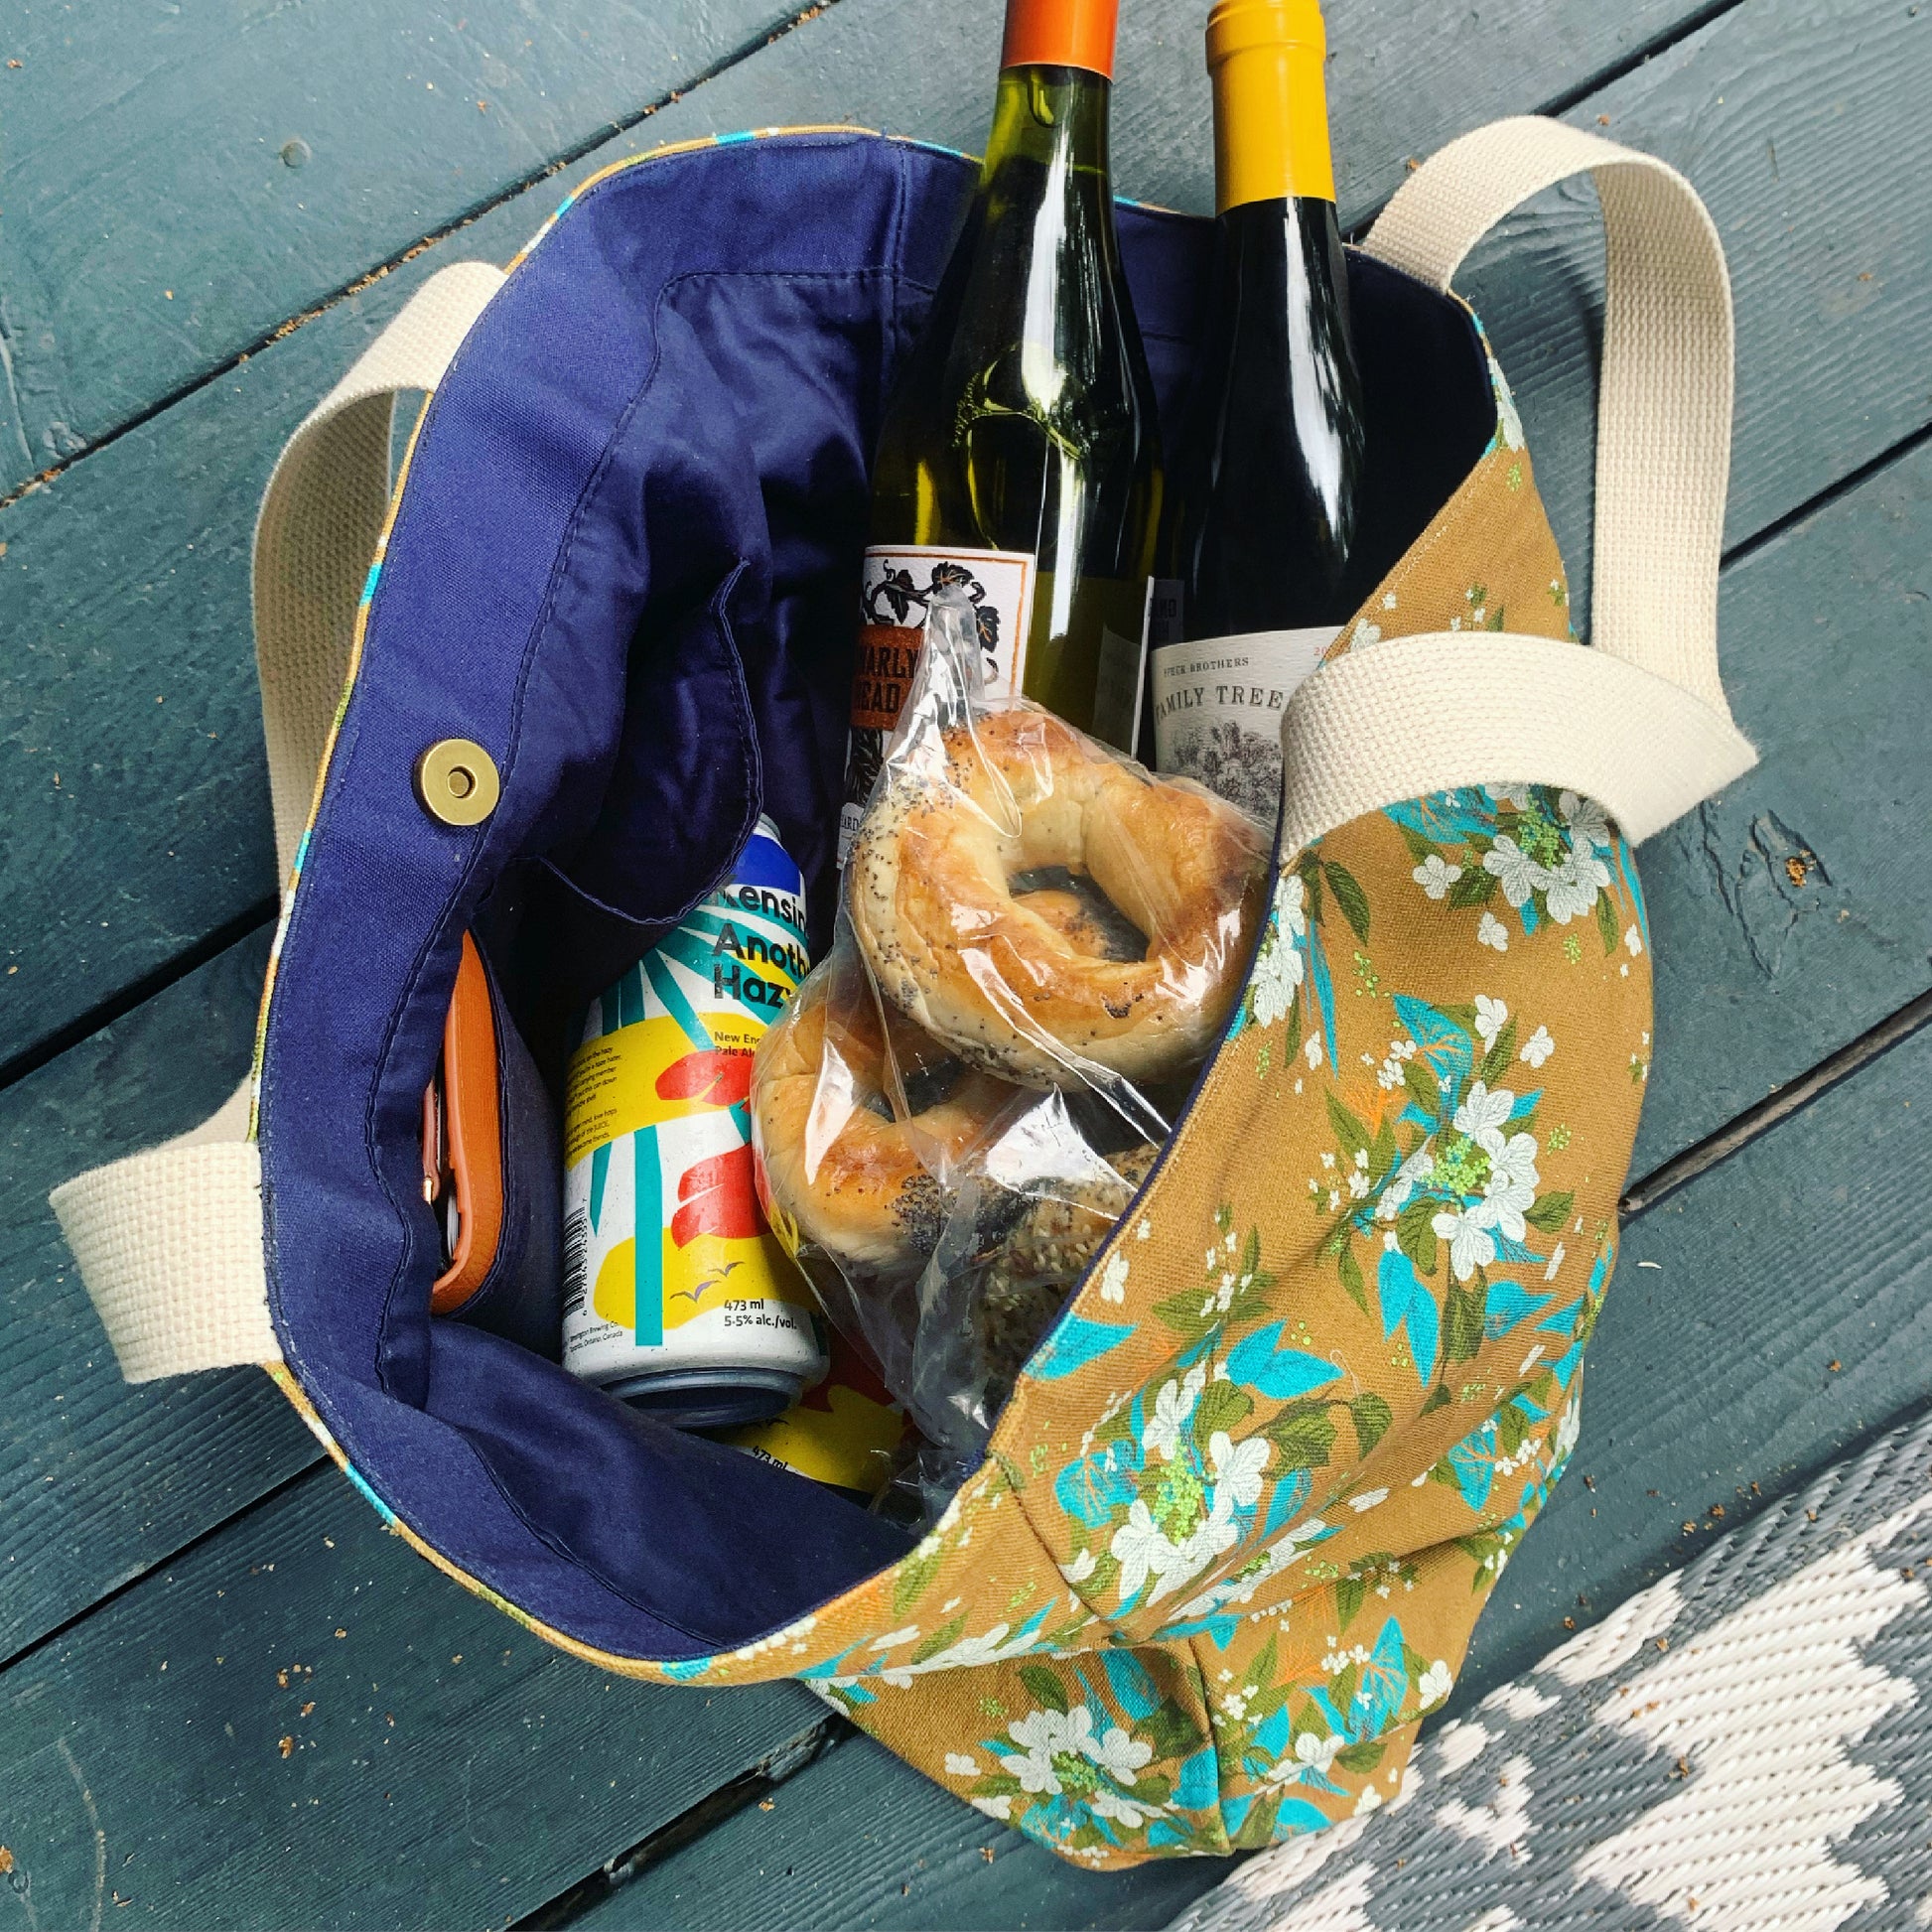 Large floral print canvas tote bag filled with bottles of wine, beer, and bagels